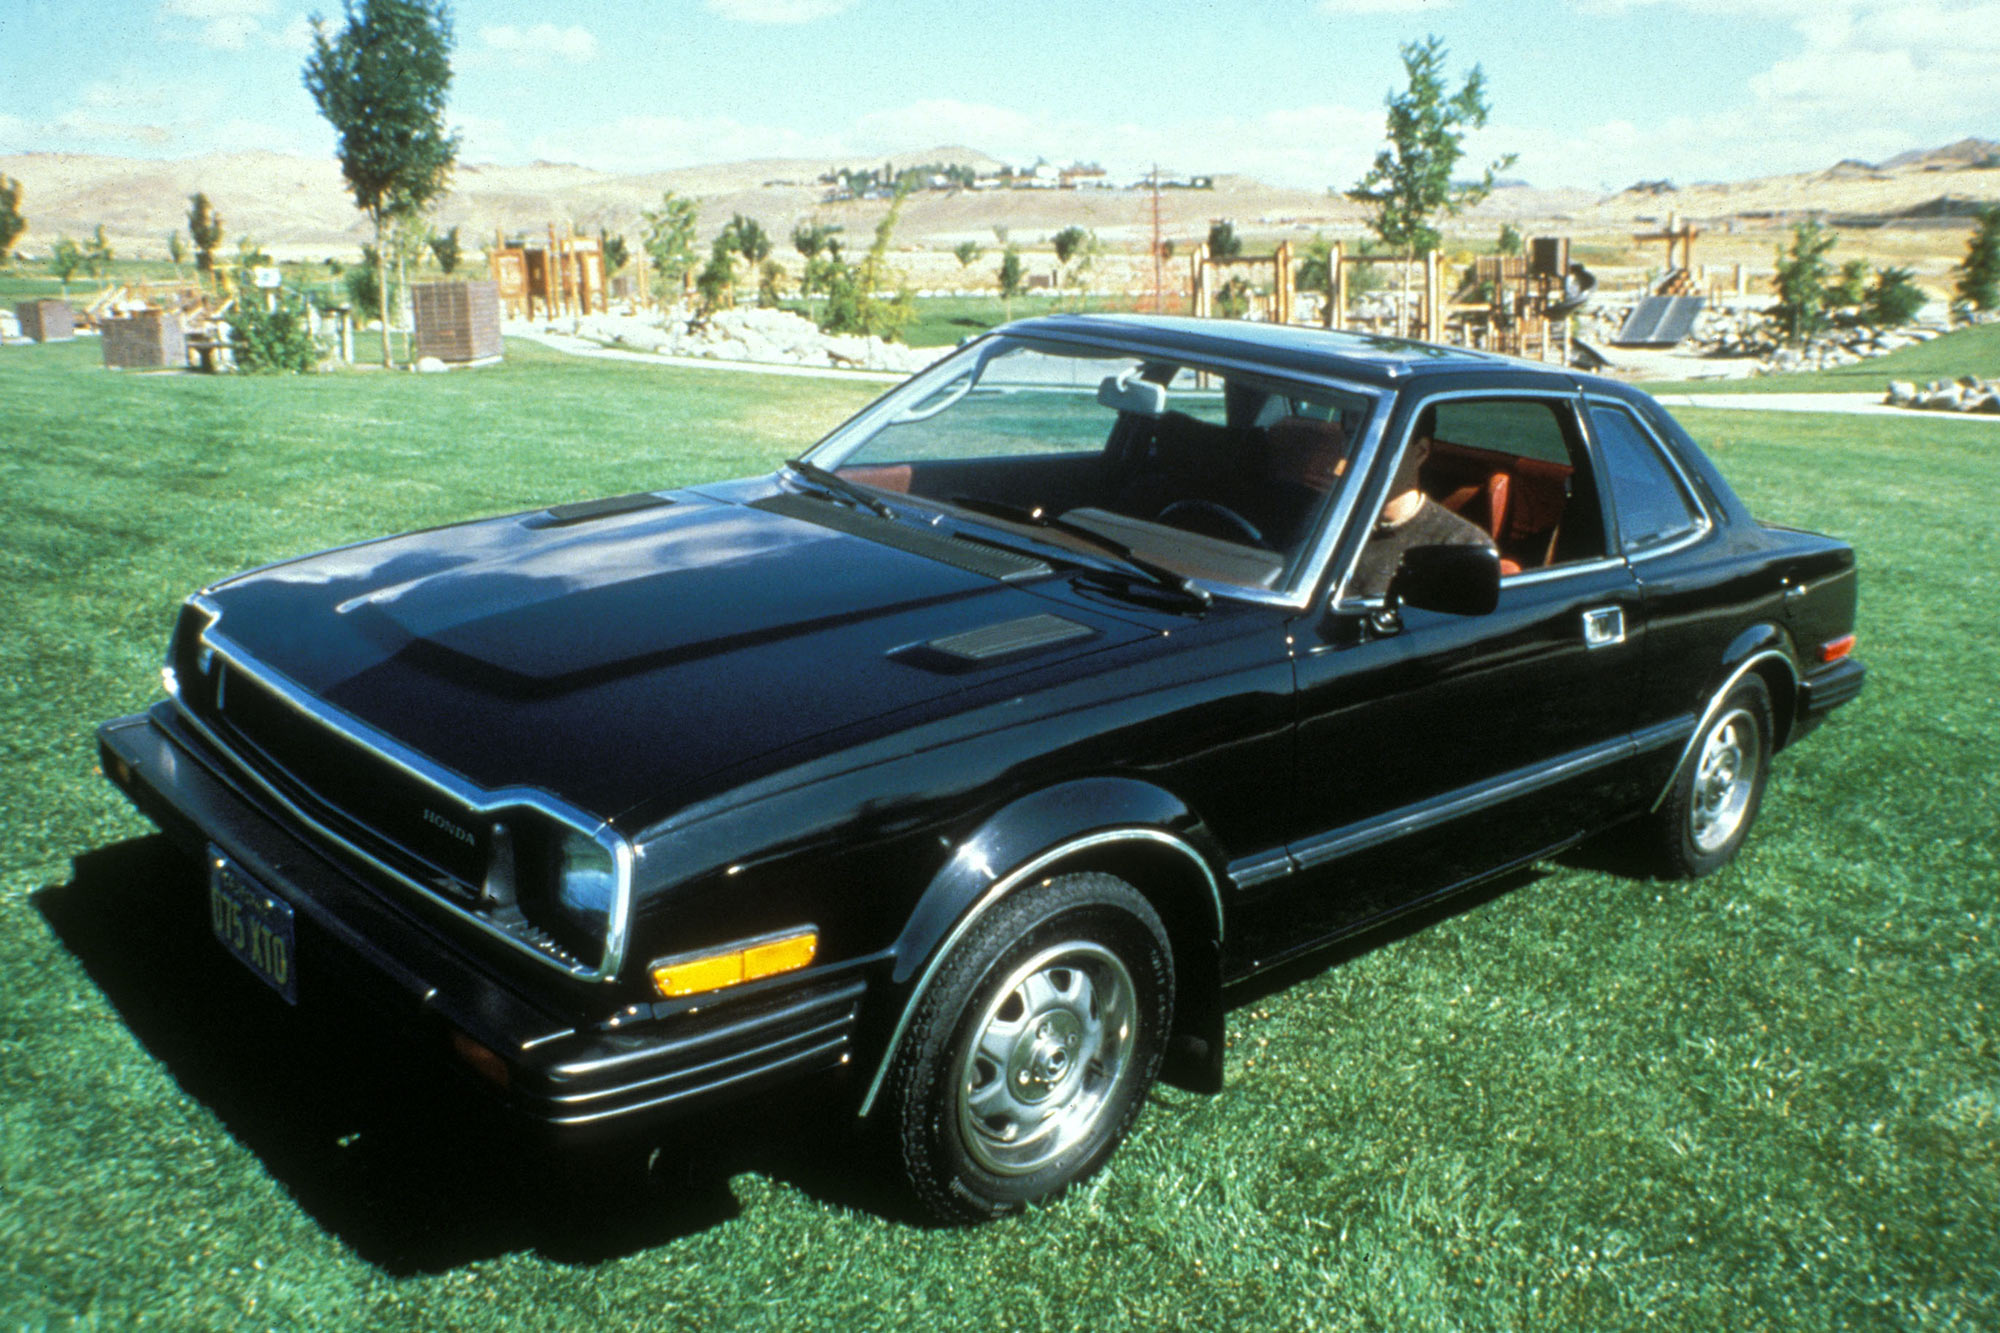 Black 1979 Honda Prelude parked on the grass